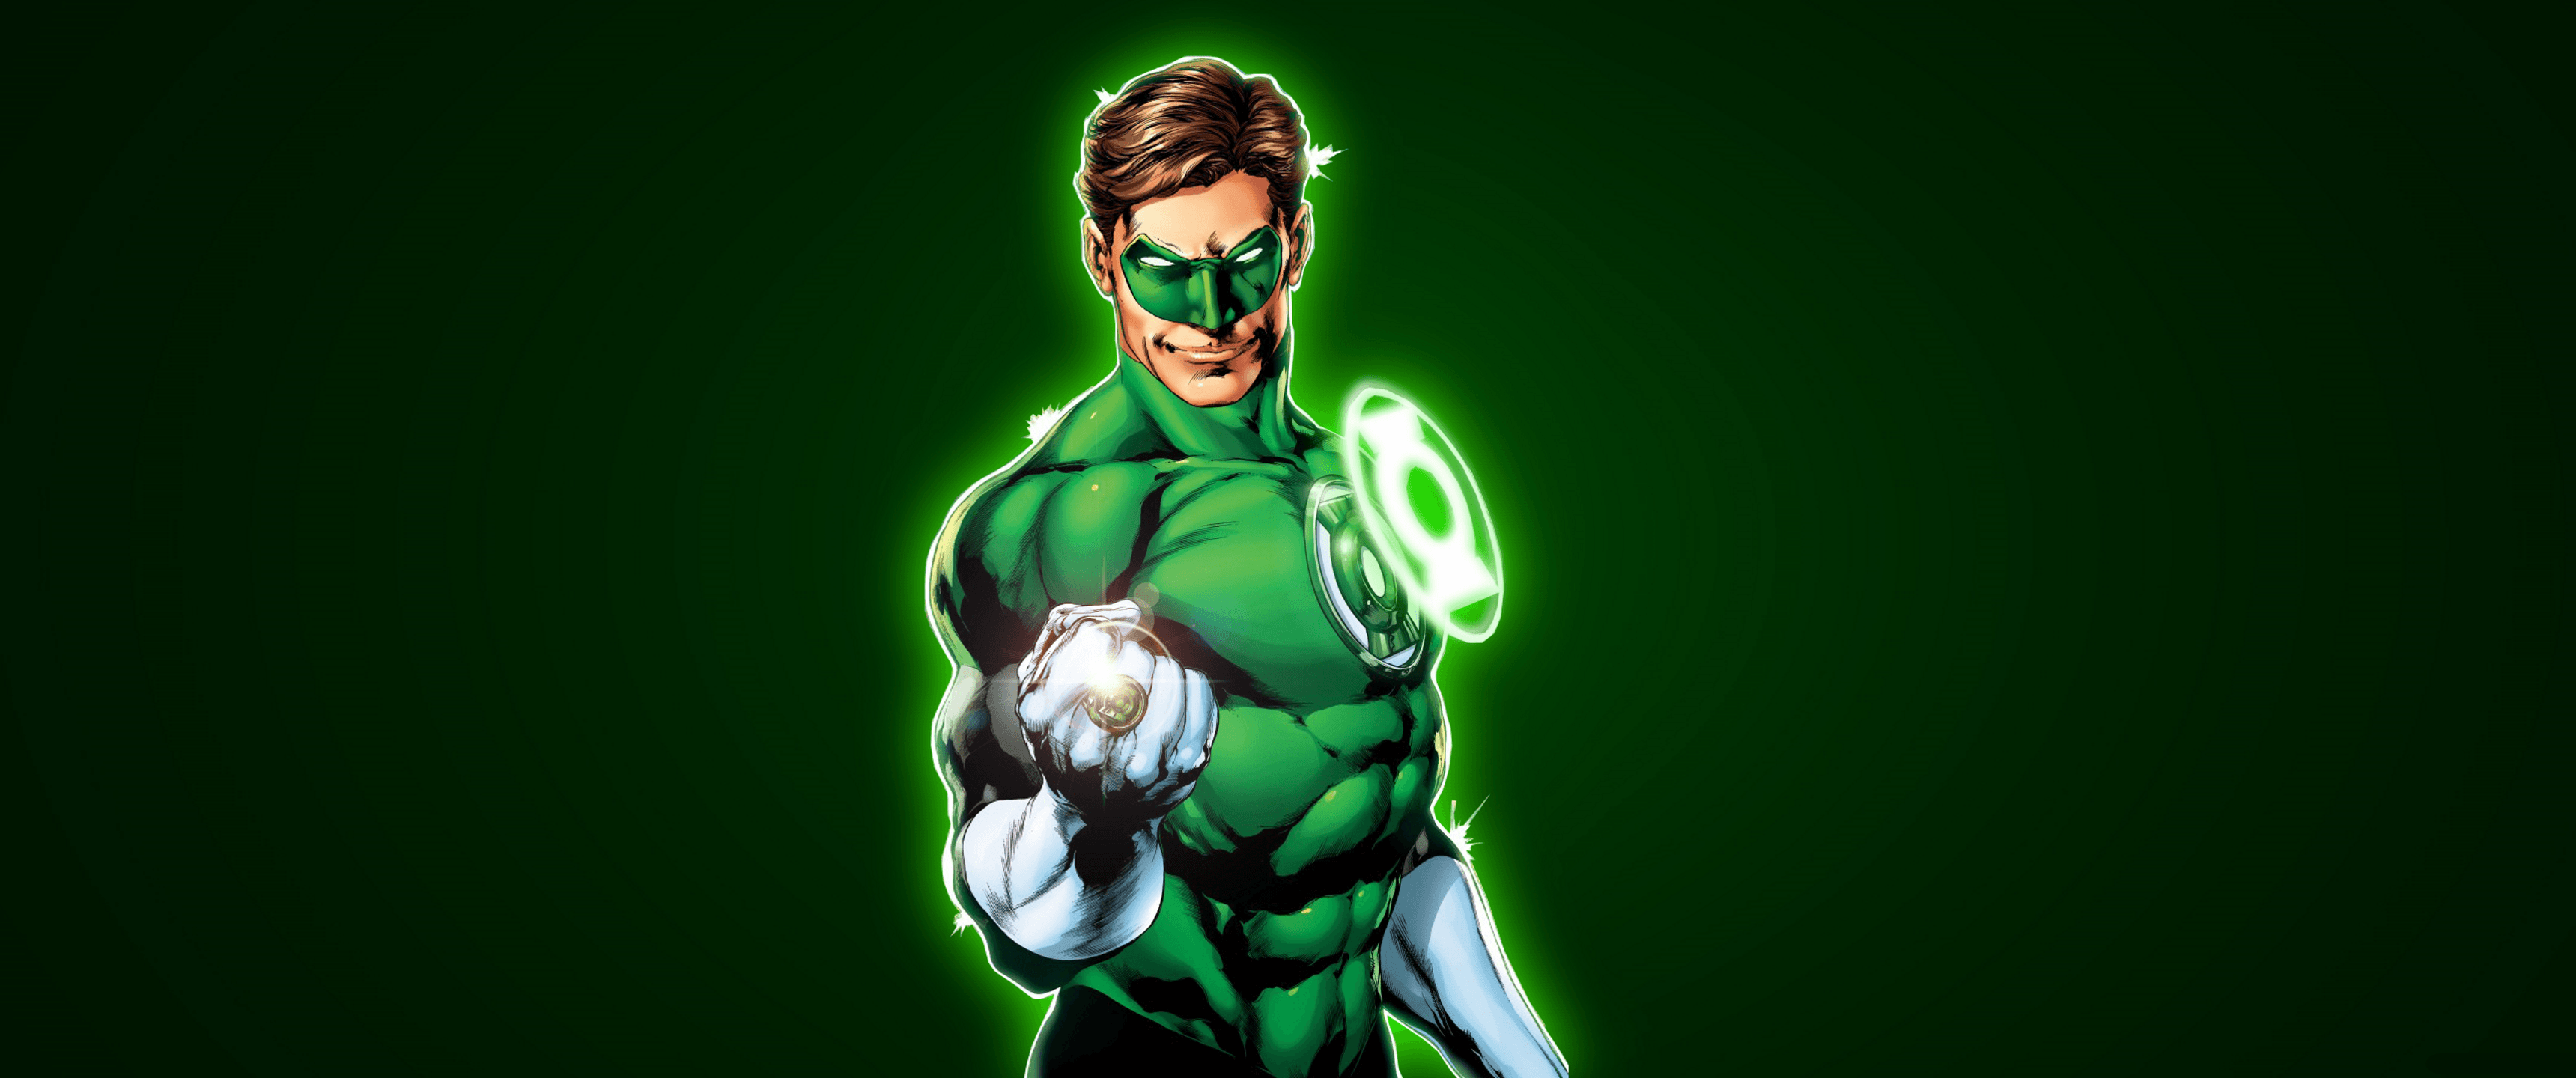 Green Lantern Full HD Wallpaper and Background Imagex1440